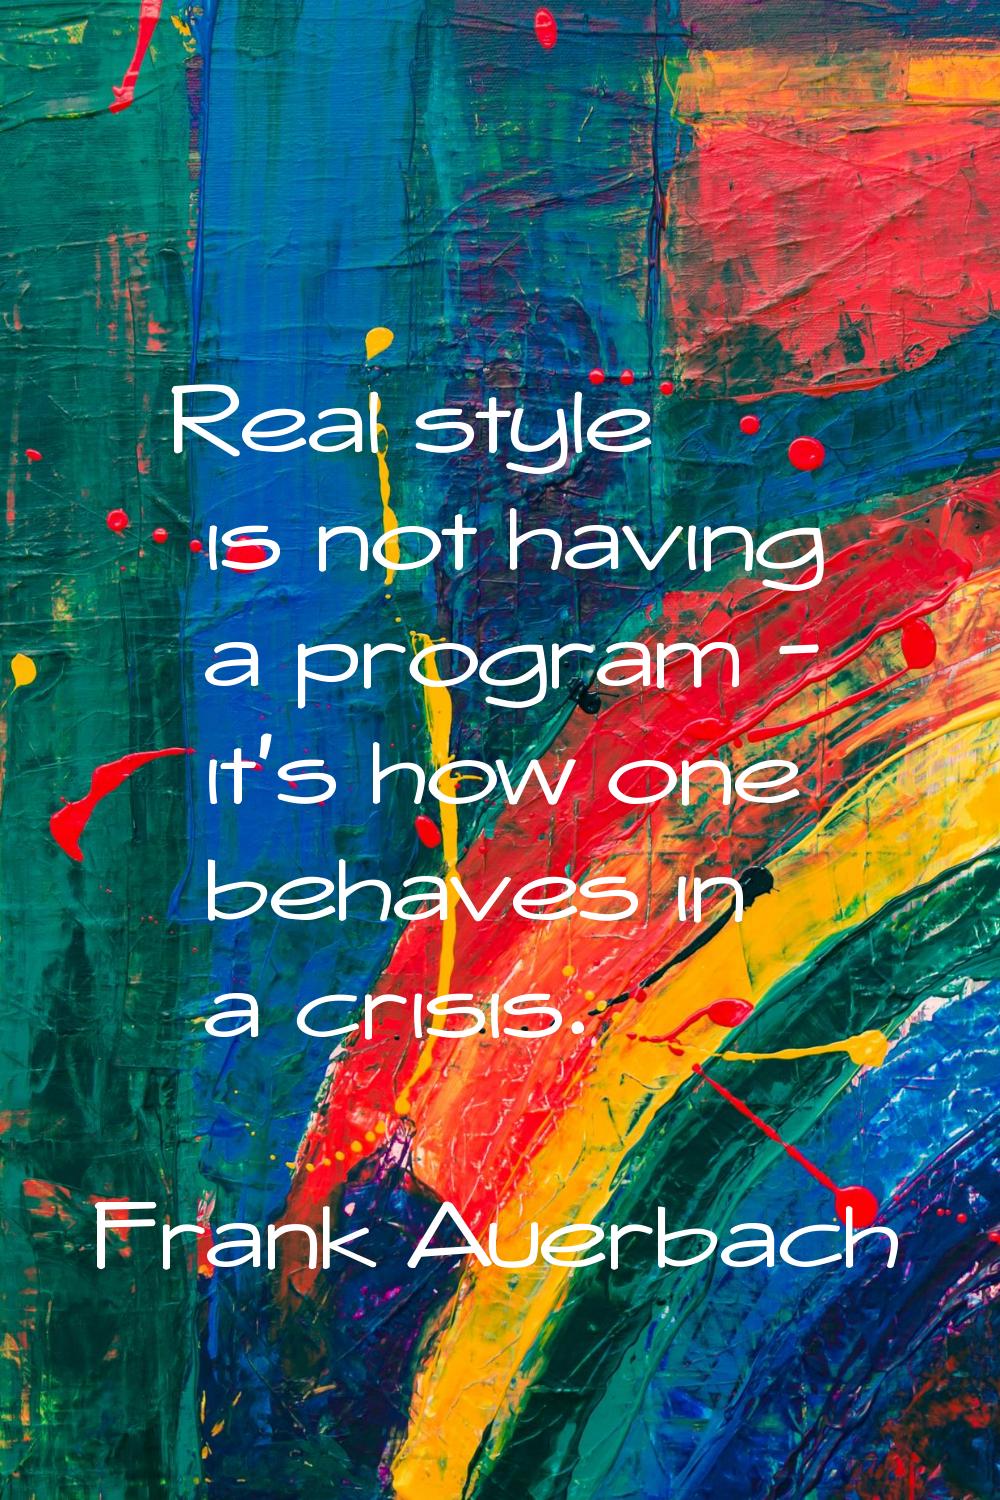 Real style is not having a program - it's how one behaves in a crisis.